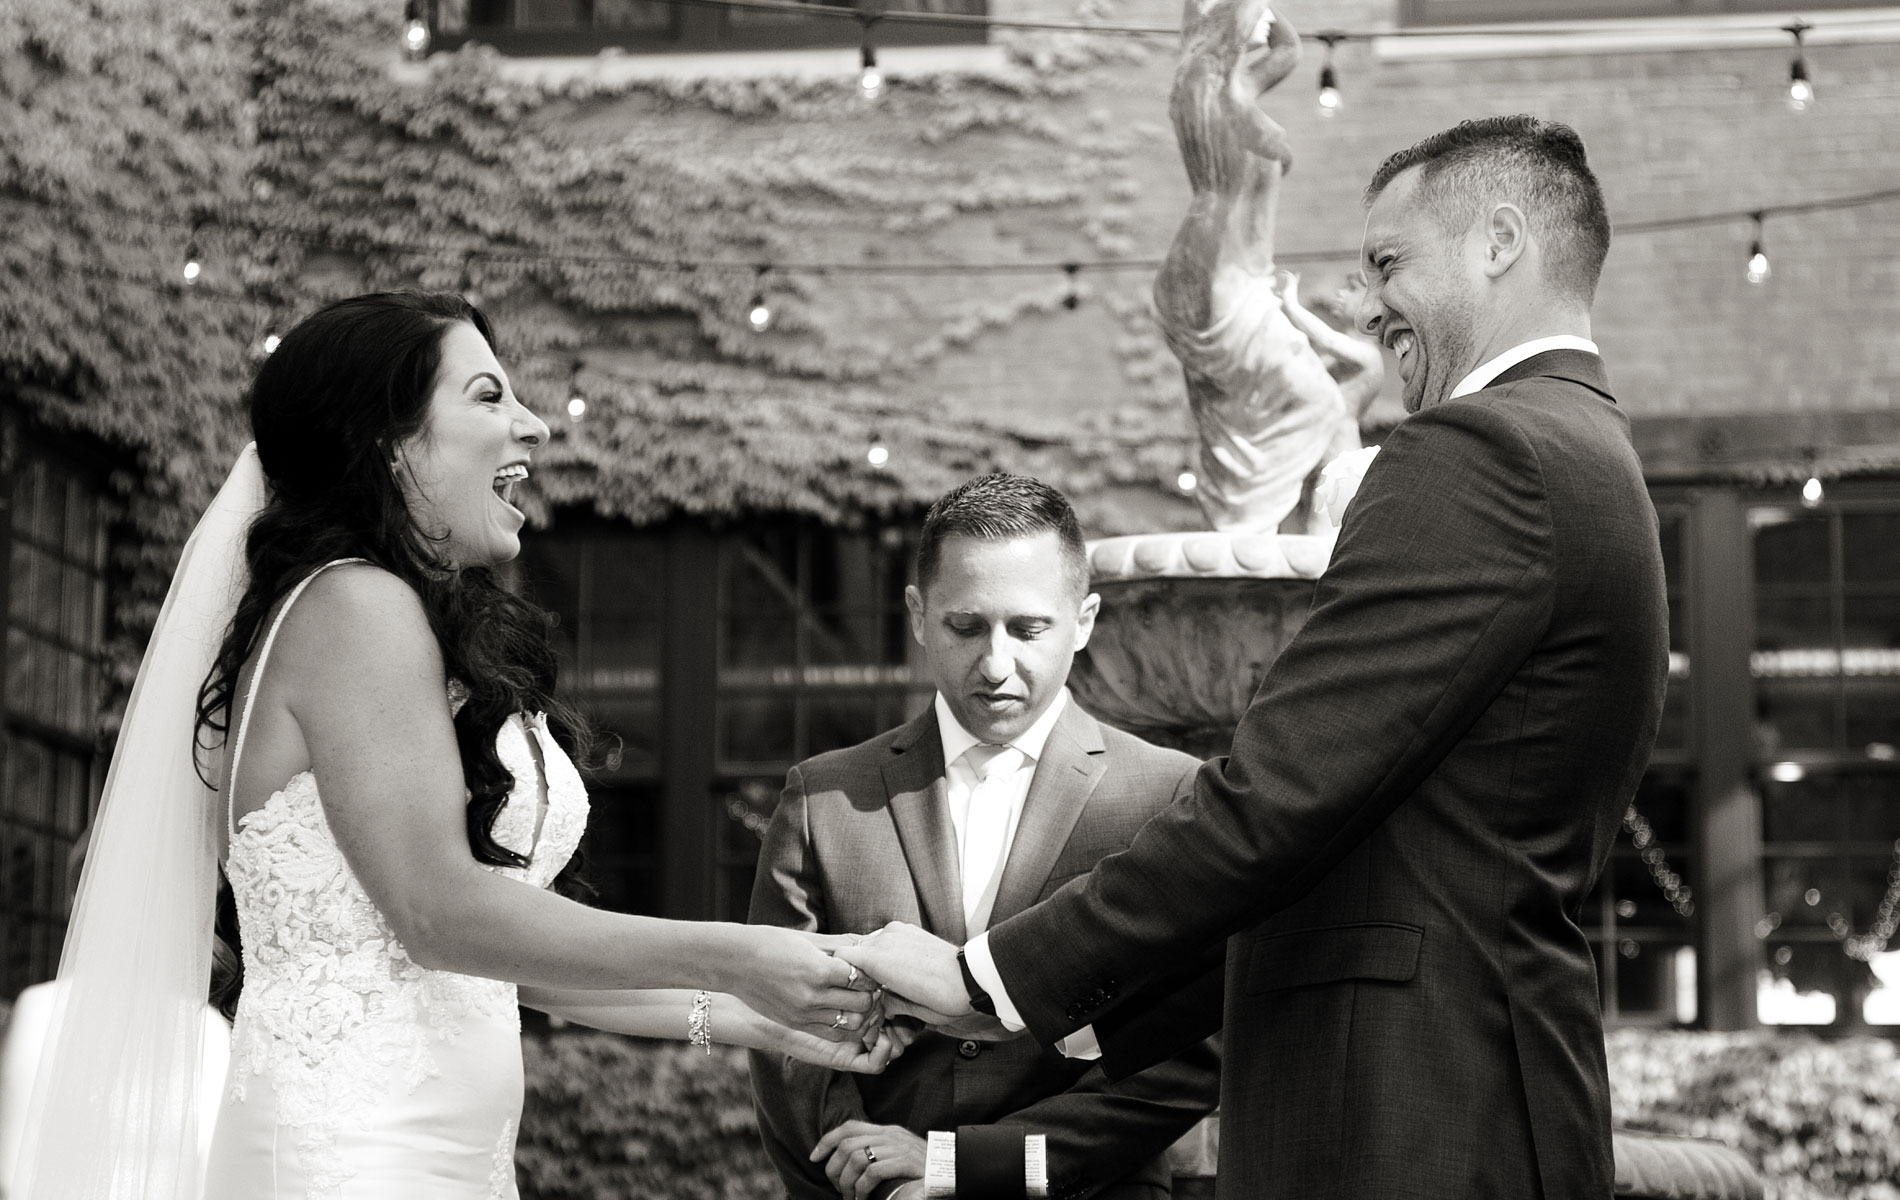 A second wedding photographer is a huge benefit - Fisher Creative Image Photography Buffalo NY